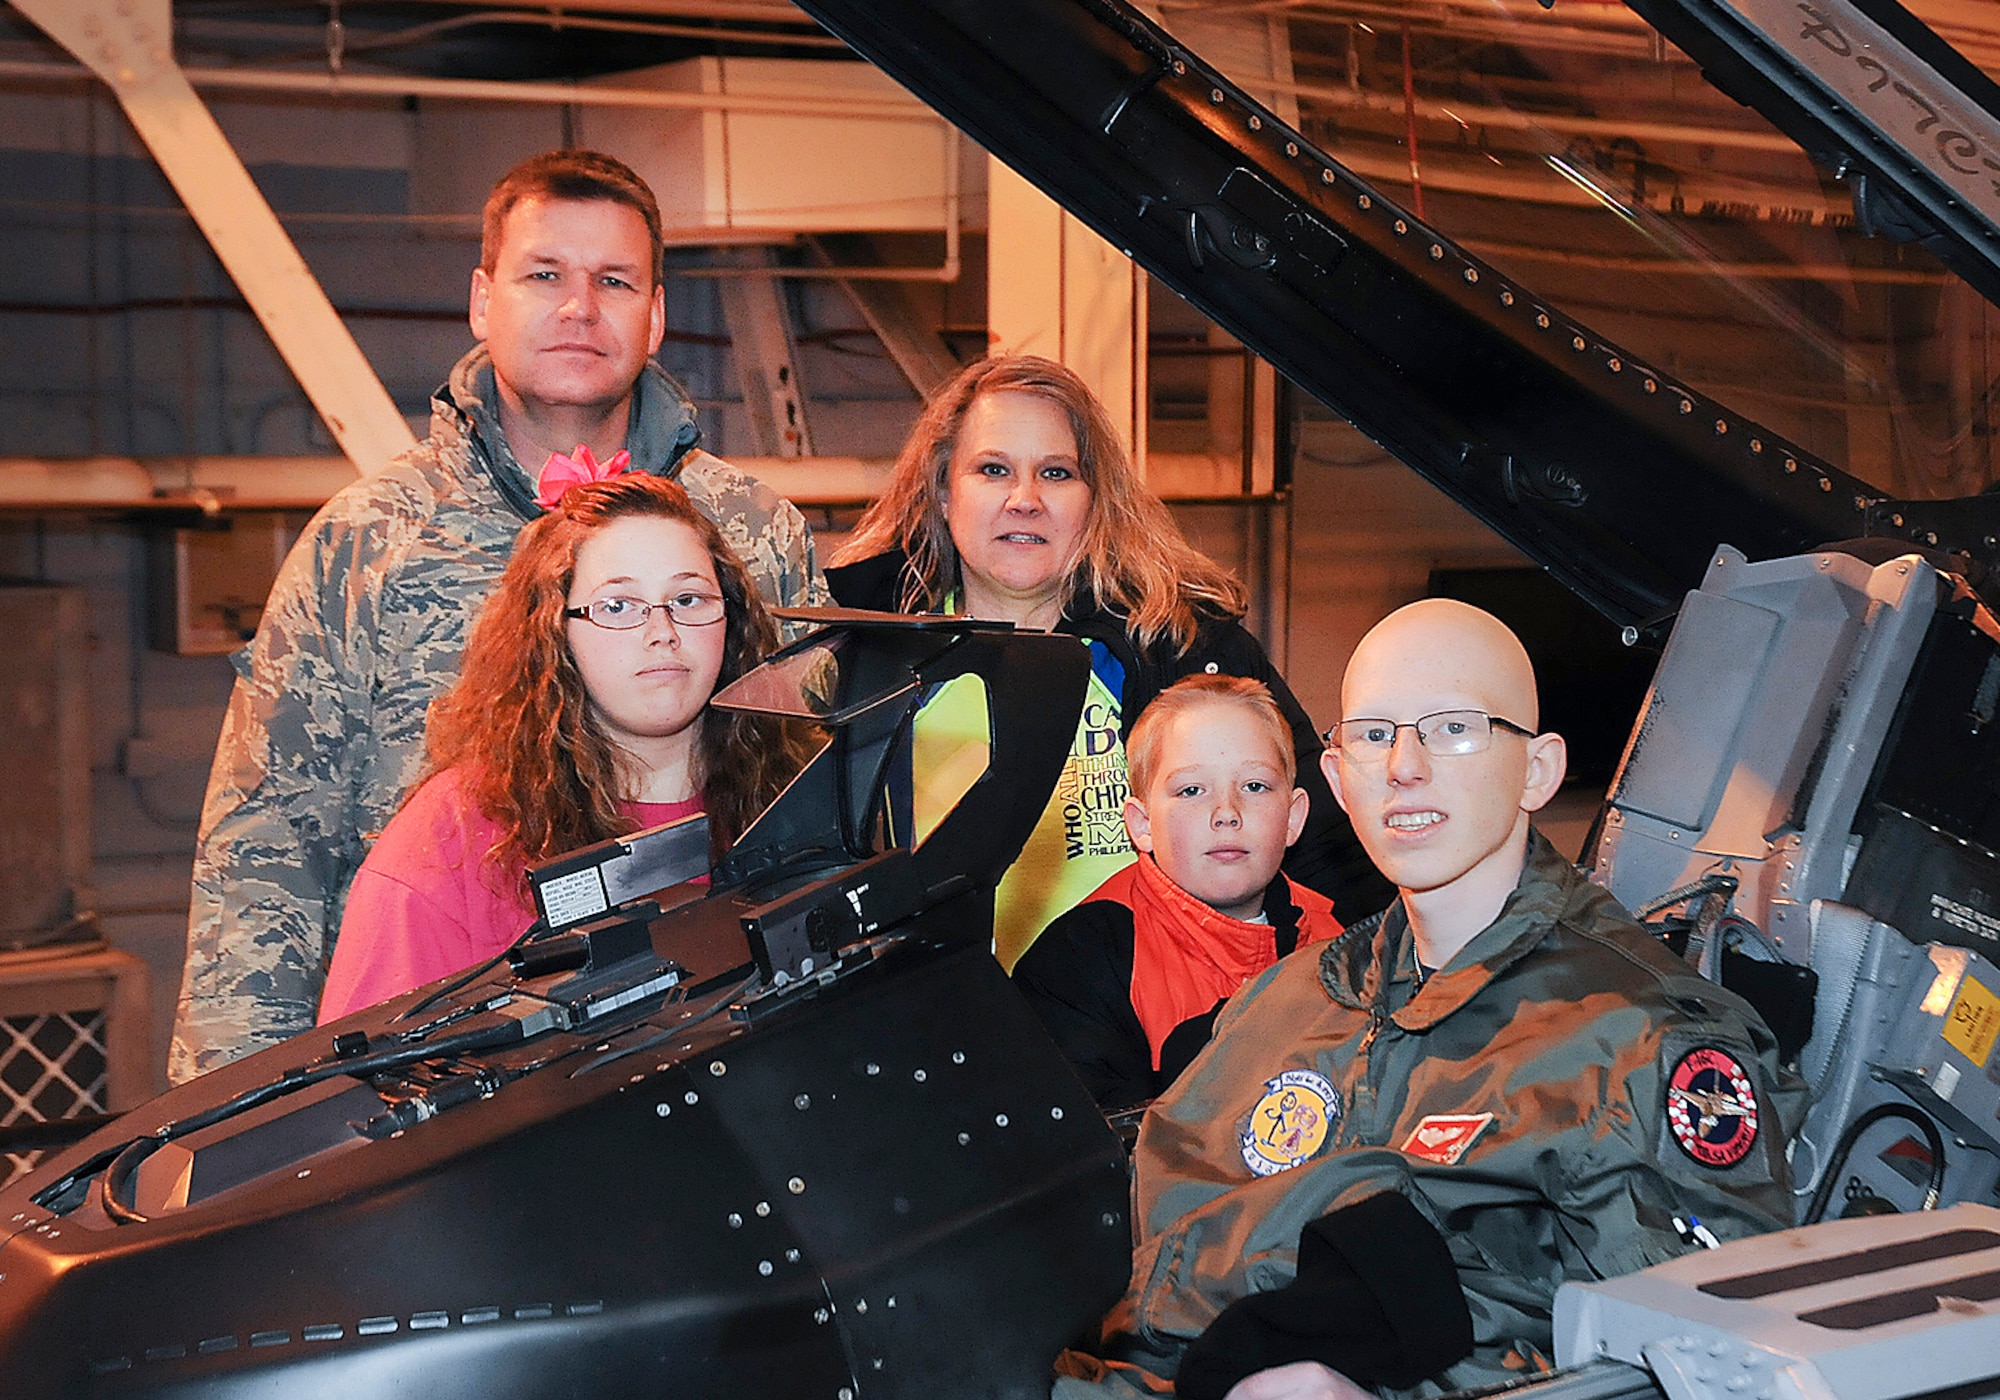 Josh Payton, 138th Fighter Wing's "pilot for a day" with parents A1C Jacky Payton and wife Marie, sister Gracie and brother Jared during his visit as an honored guest Feb. 19, 2015, at the Tulsa Air National Guard base, Tulsa, Okla.  The pilot for a day program is intended to recognize and honor children with potentially life threatening illnesses and started at the 138th in May 2012, and has hosted seven children since it began.  (U.S. National Guard photo by Senior Master Sgt.  Preston L. Chasteen/Released)